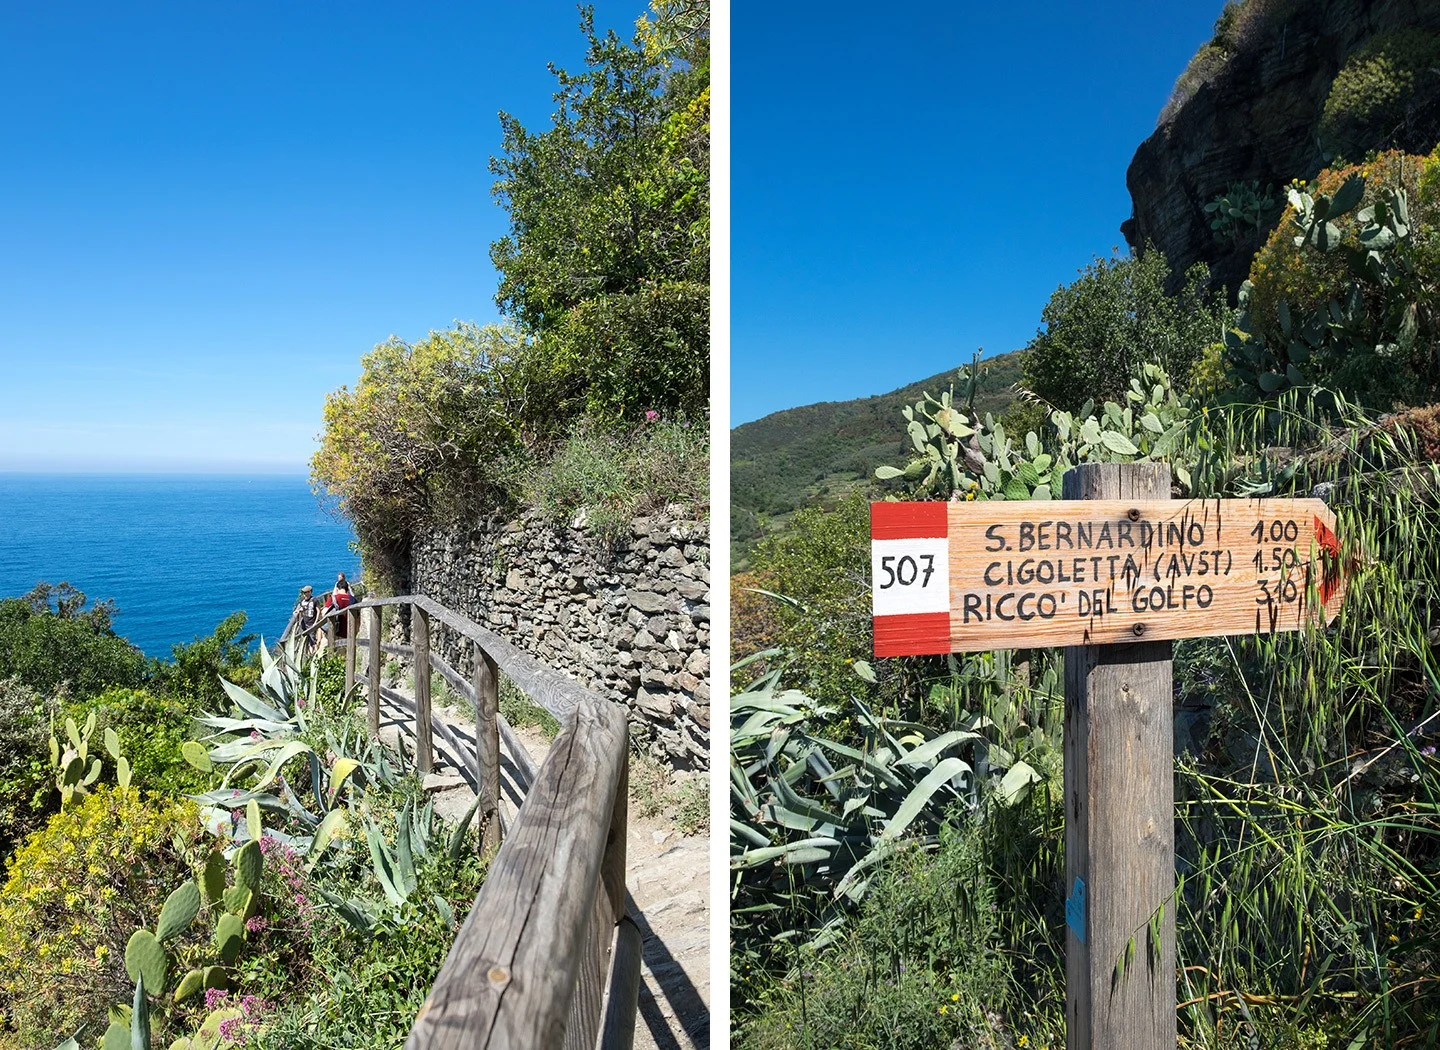 Walking the coast path in the Cinque Terre, Italy